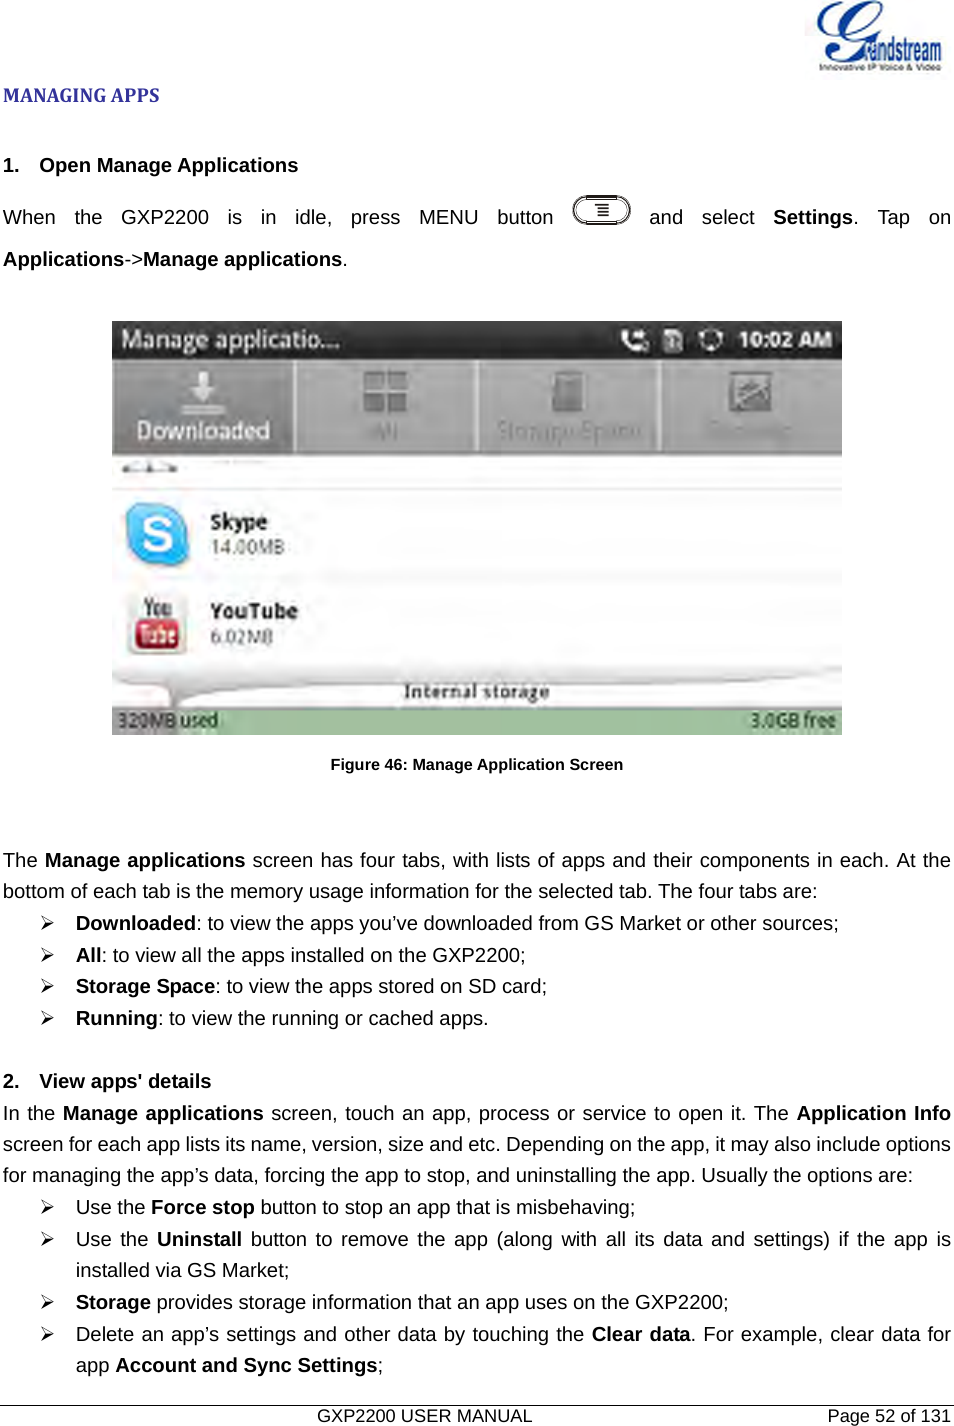   GXP2200 USER MANUAL       Page 52 of 131                                  MANAGINGAPPS 1. Open Manage Applications When the GXP2200 is in idle, press MENU button   and  select  Settings. Tap on Applications-&gt;Manage applications.   Figure 46: Manage Application Screen   The Manage applications screen has four tabs, with lists of apps and their components in each. At the bottom of each tab is the memory usage information for the selected tab. The four tabs are: ¾ Downloaded: to view the apps you’ve downloaded from GS Market or other sources; ¾ All: to view all the apps installed on the GXP2200; ¾ Storage Space: to view the apps stored on SD card; ¾ Running: to view the running or cached apps.  2.  View apps&apos; details In the Manage applications screen, touch an app, process or service to open it. The Application Info screen for each app lists its name, version, size and etc. Depending on the app, it may also include options for managing the app’s data, forcing the app to stop, and uninstalling the app. Usually the options are: ¾ Use the Force stop button to stop an app that is misbehaving; ¾ Use the Uninstall button to remove the app (along with all its data and settings) if the app is installed via GS Market; ¾ Storage provides storage information that an app uses on the GXP2200; ¾  Delete an app’s settings and other data by touching the Clear data. For example, clear data for app Account and Sync Settings; 